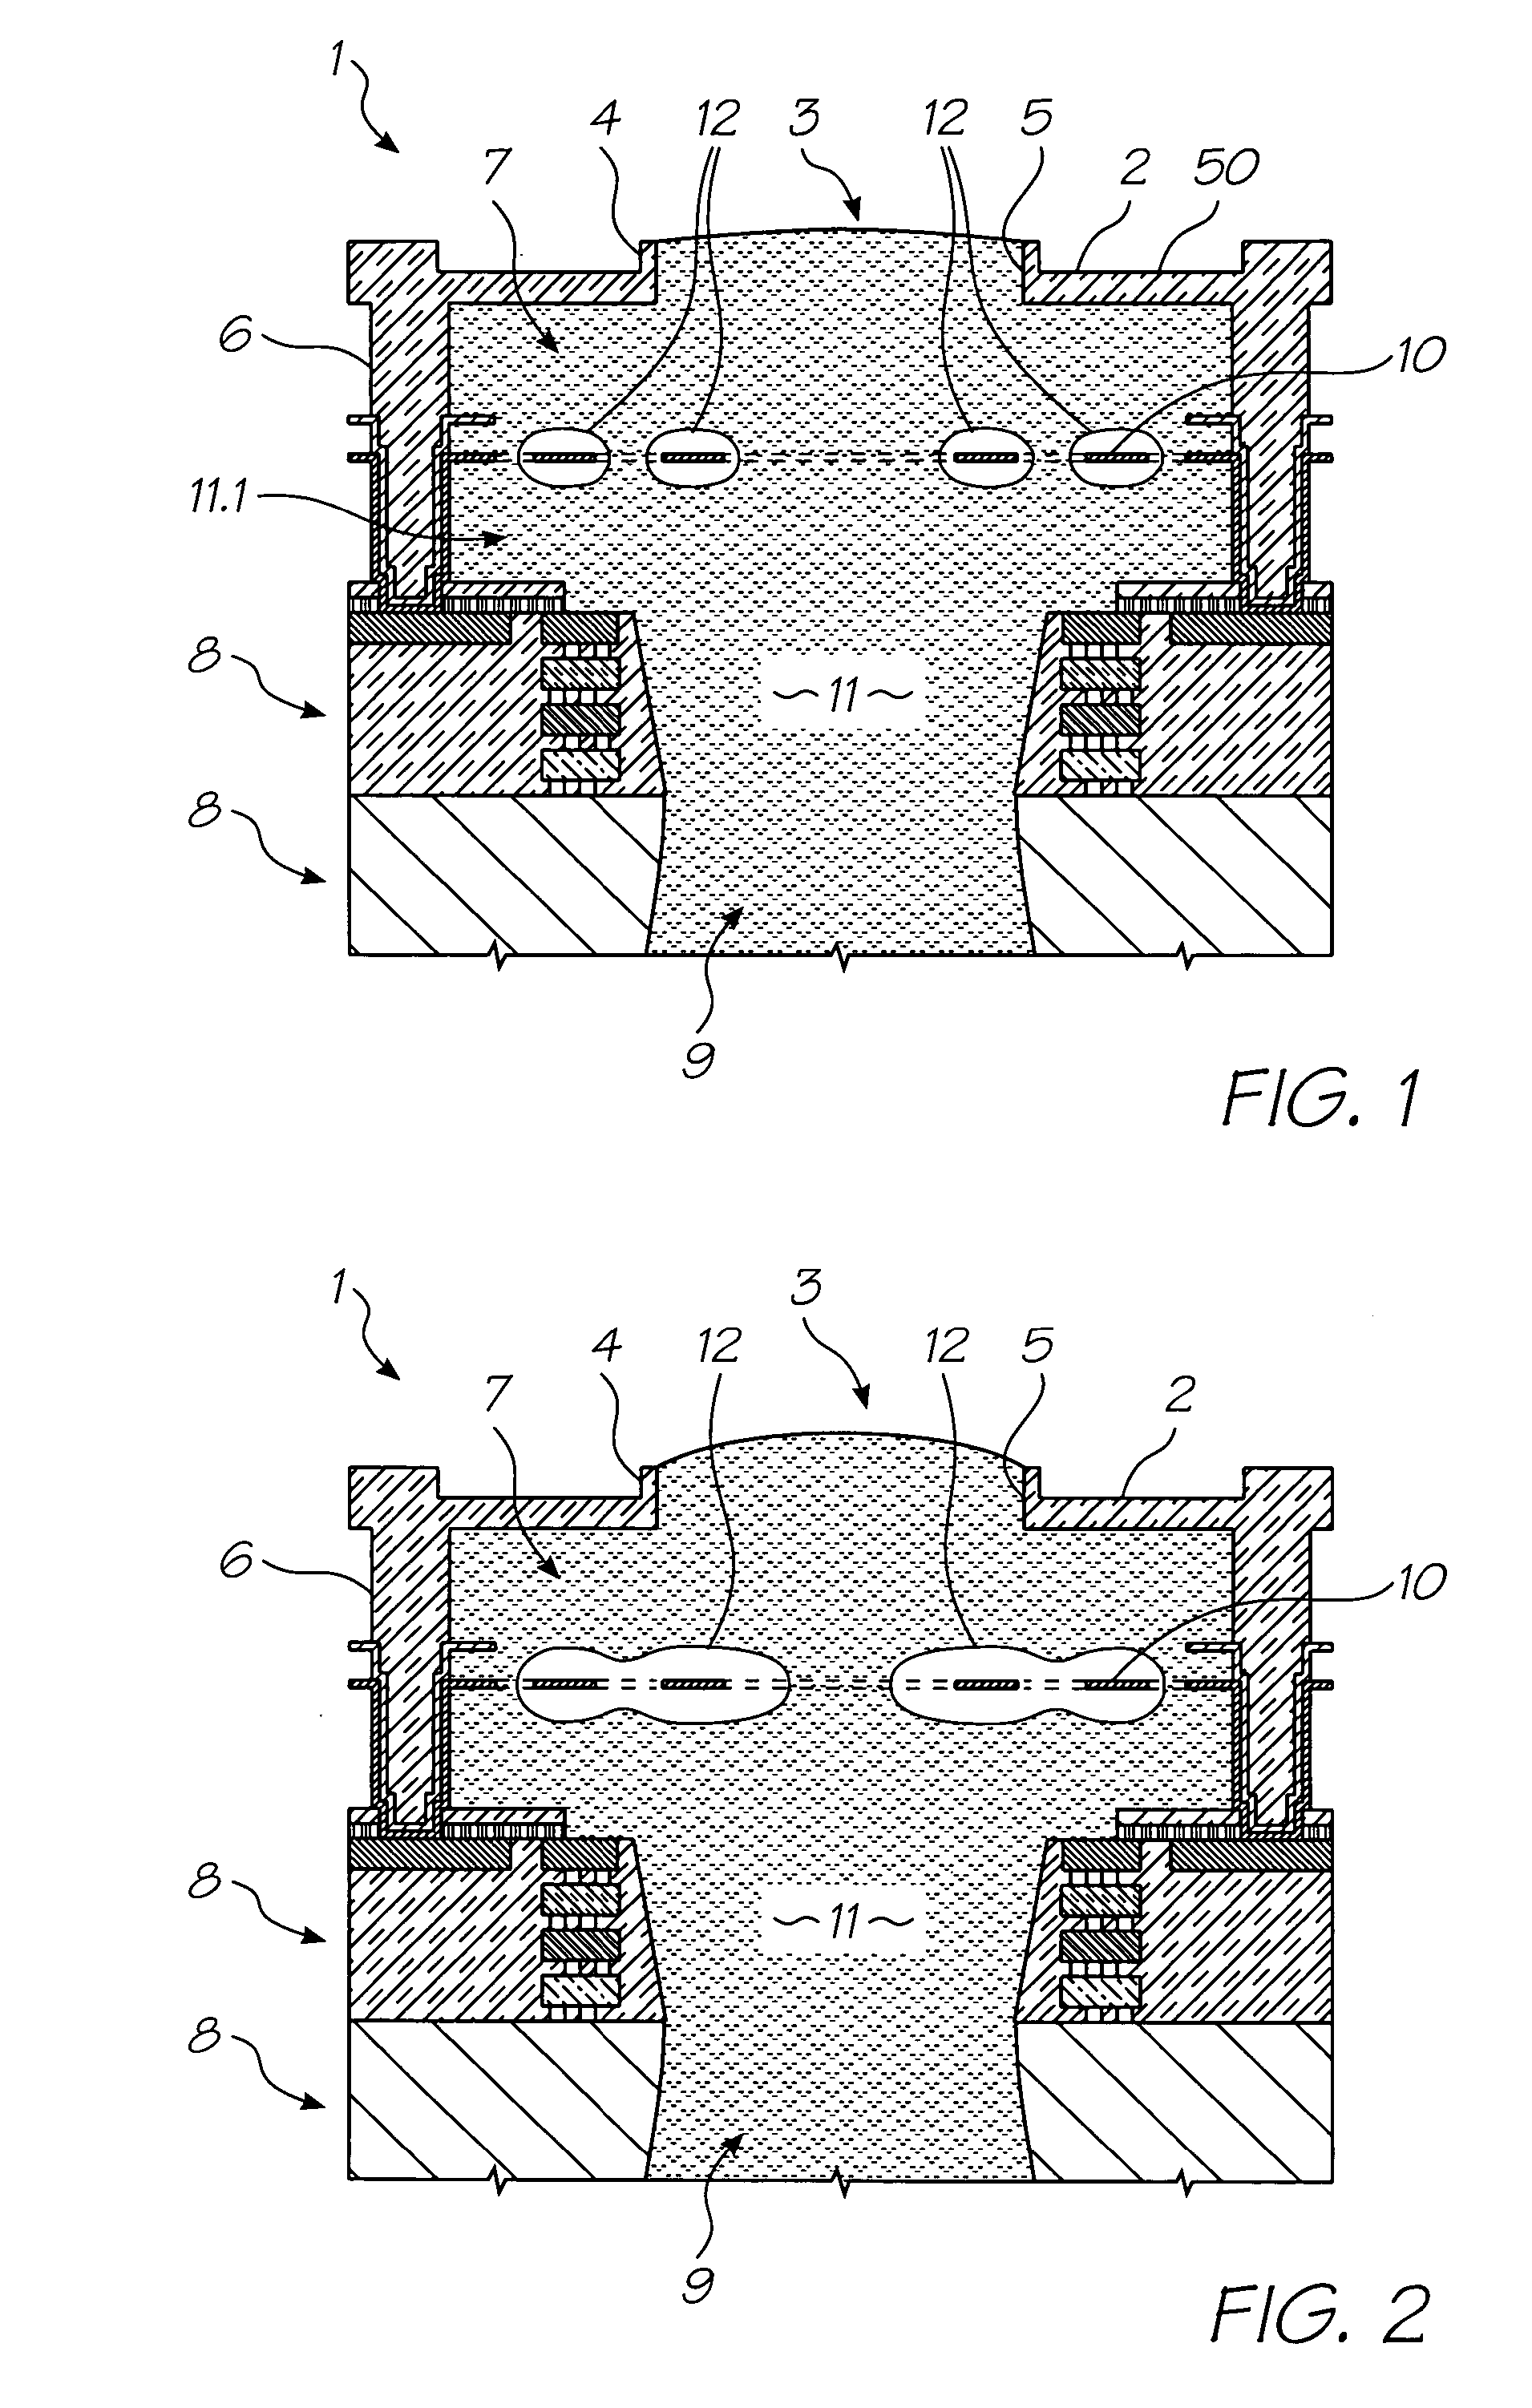 Printhead heaters with short pulse time